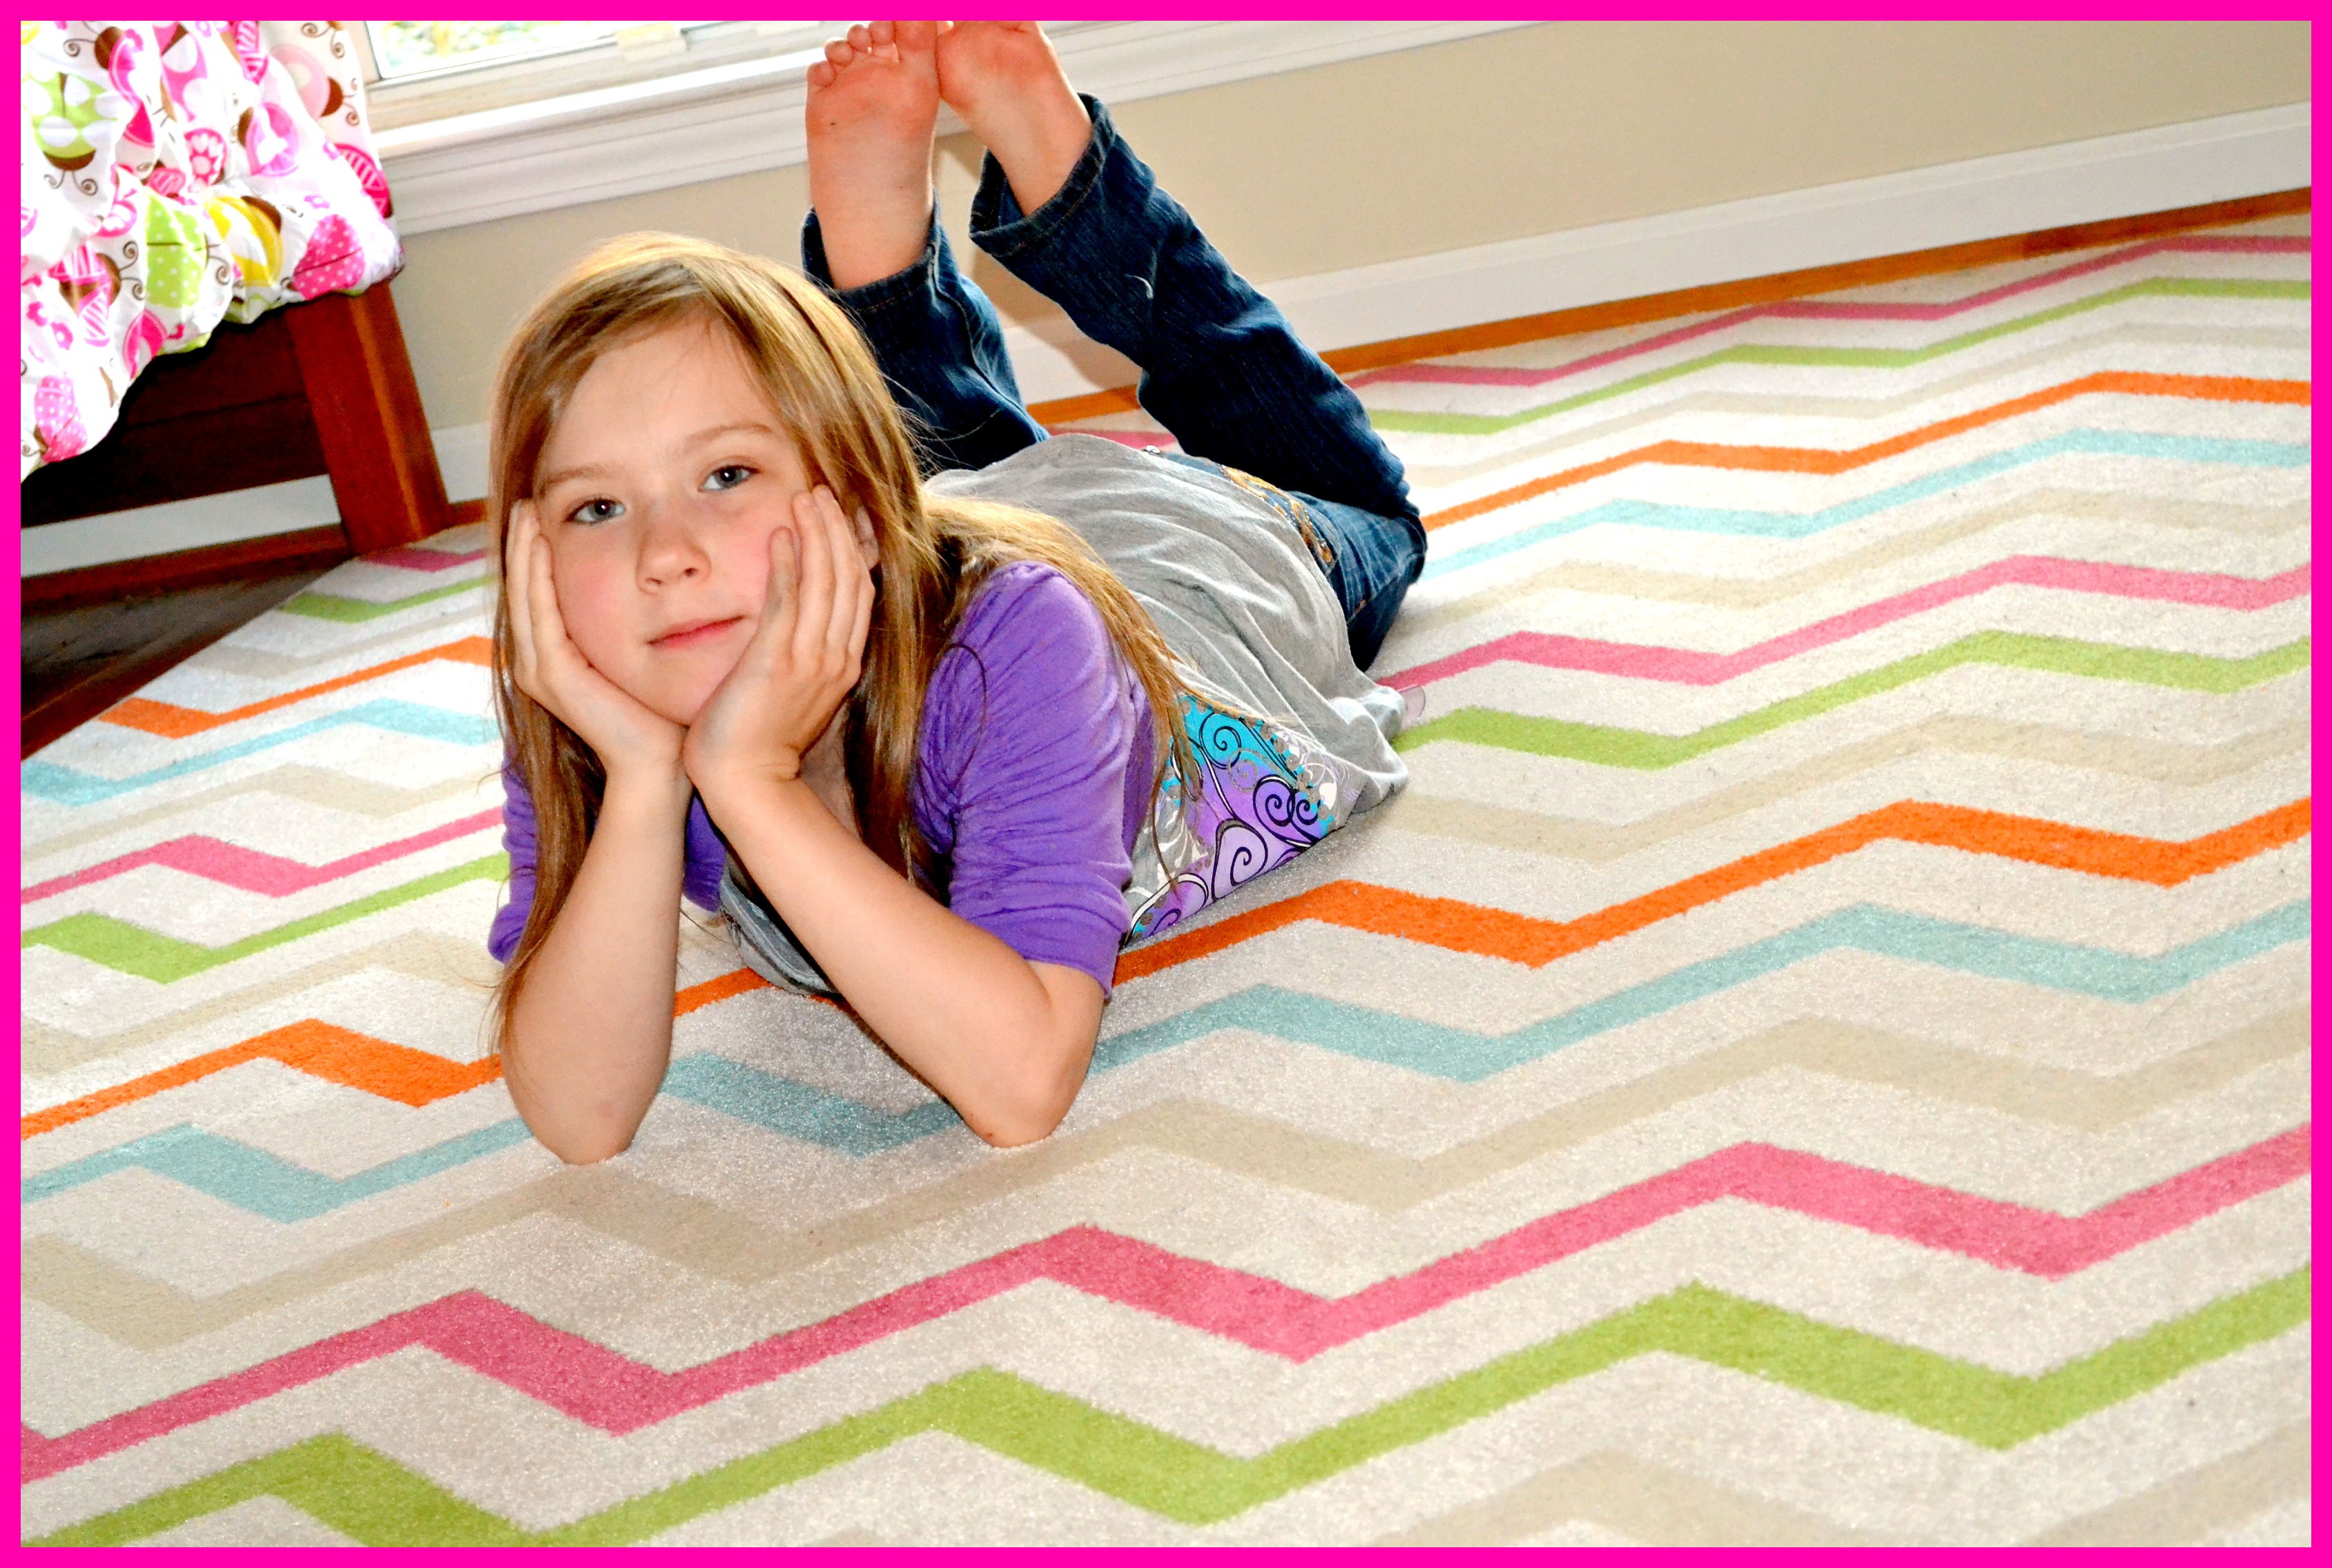 Brighten Up a Room With A New Rug: Mohawk Rug Review #ilovemymohawkrug